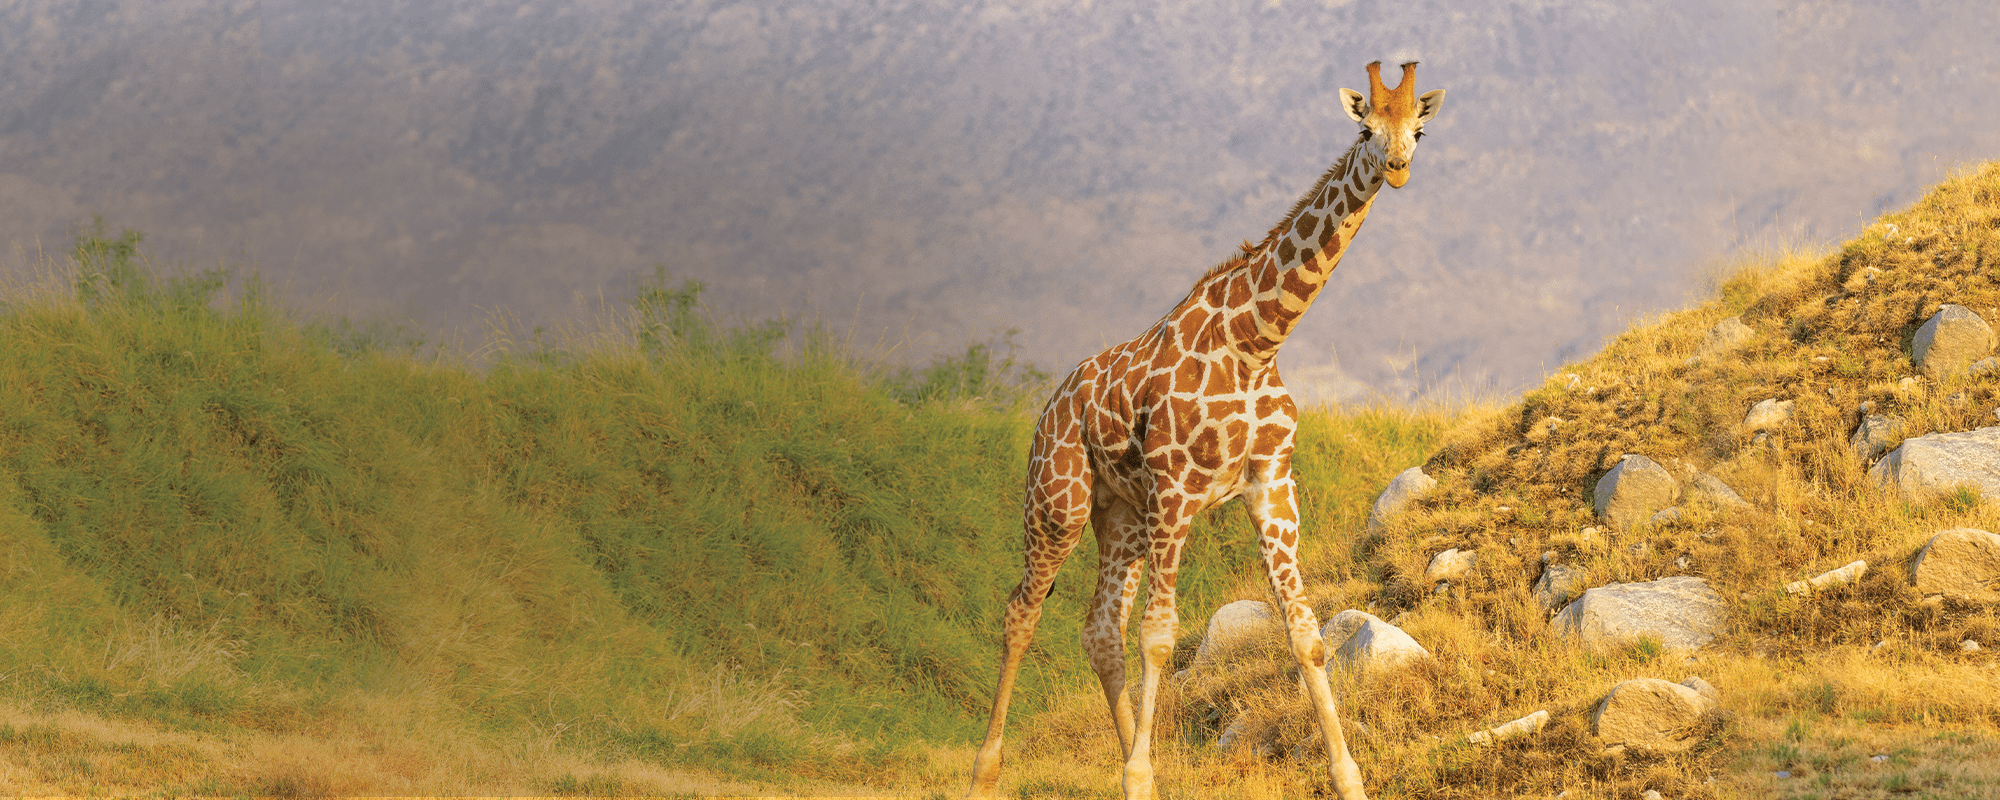 A Conversation with Dr. Anne Innis Dagg the Woman who loves Giraffes header image